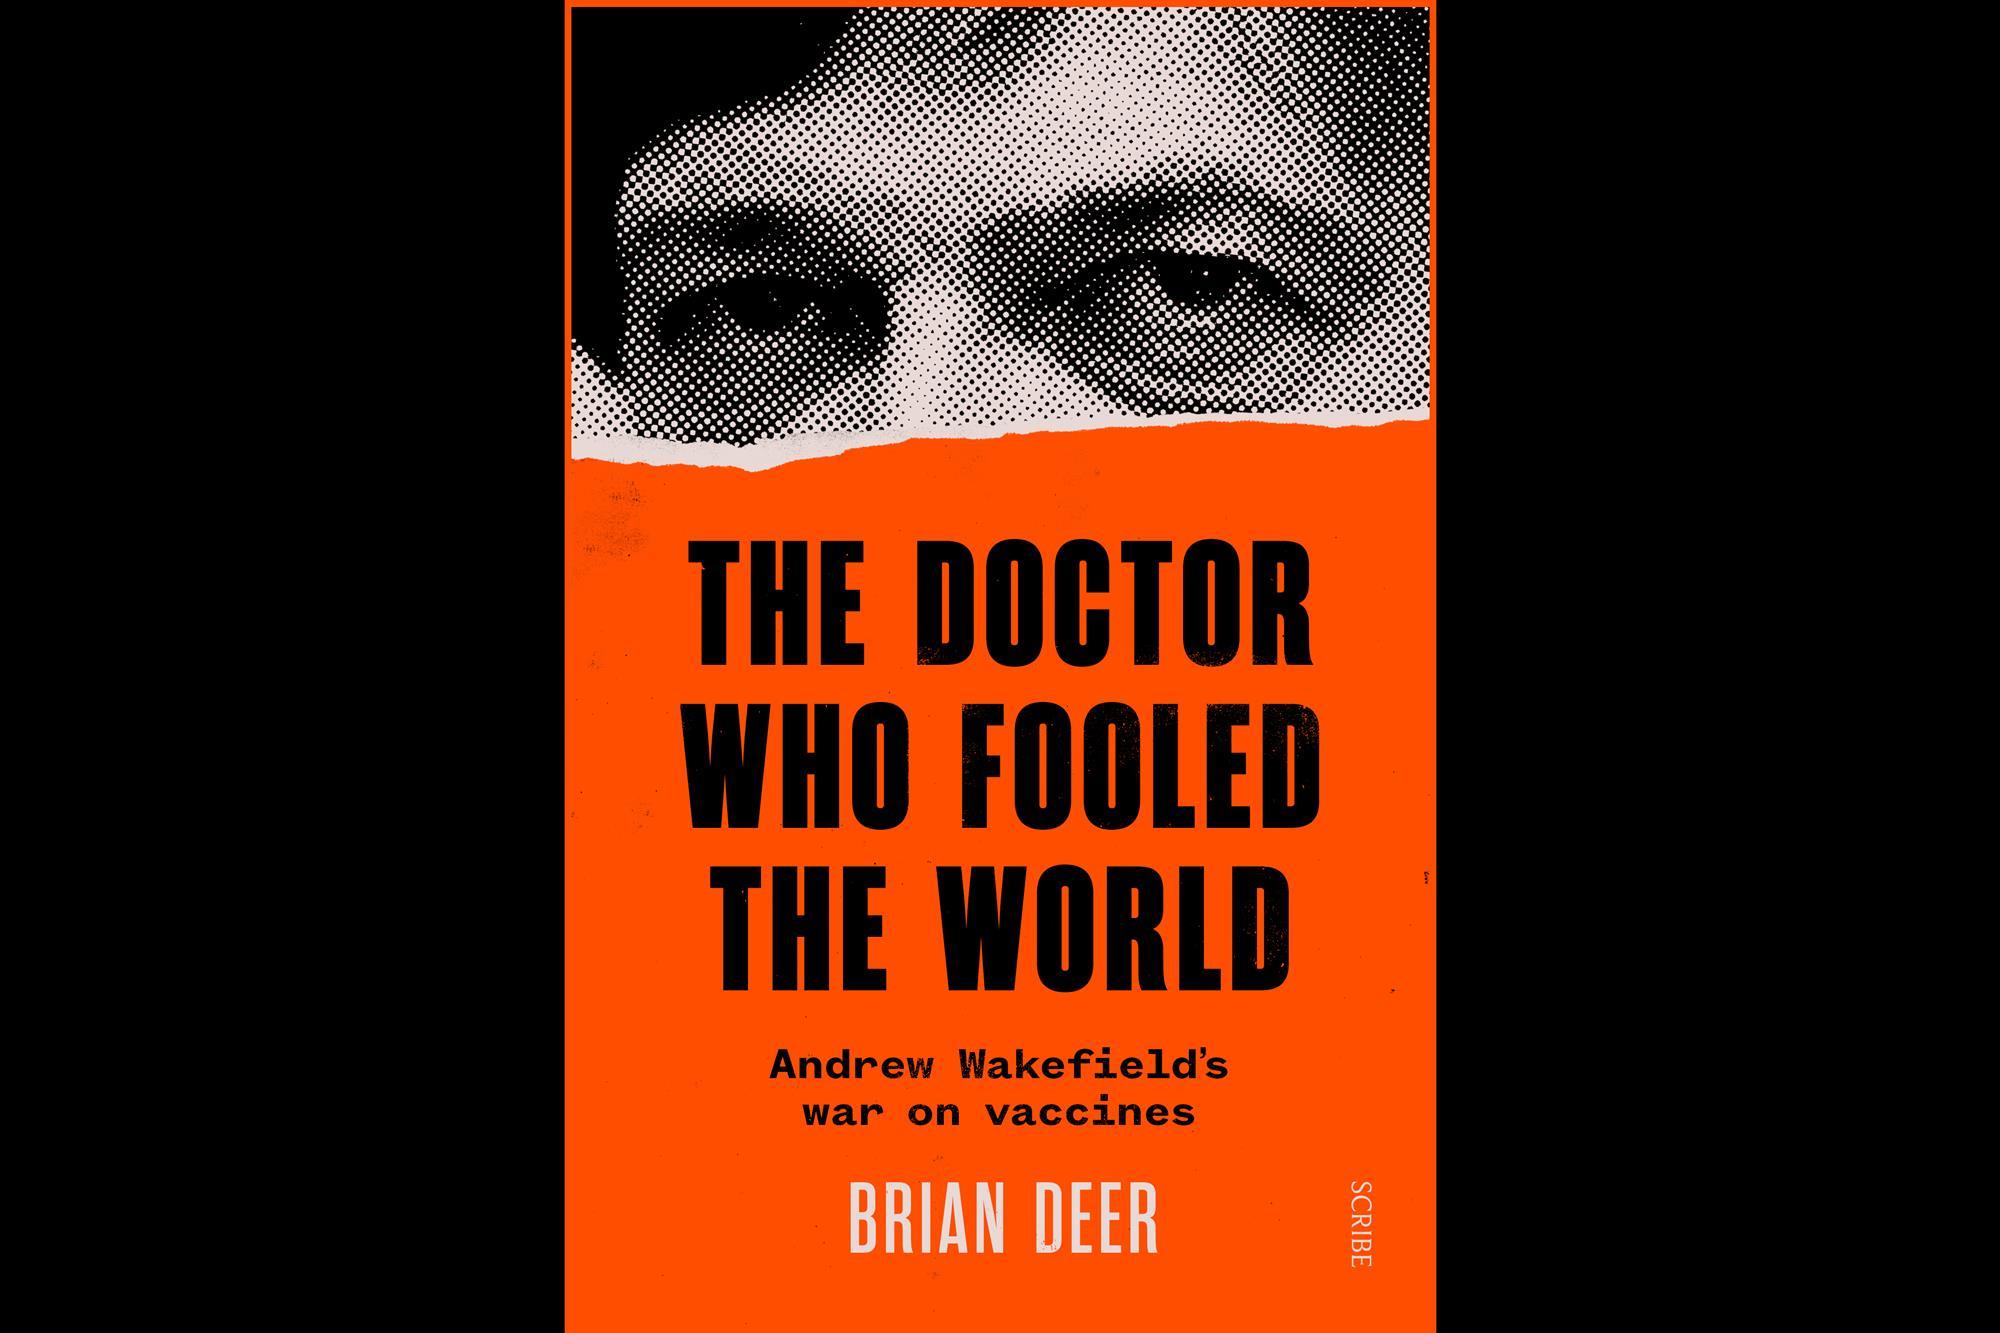 Book cover for "The Doctor Who Fooled the World"